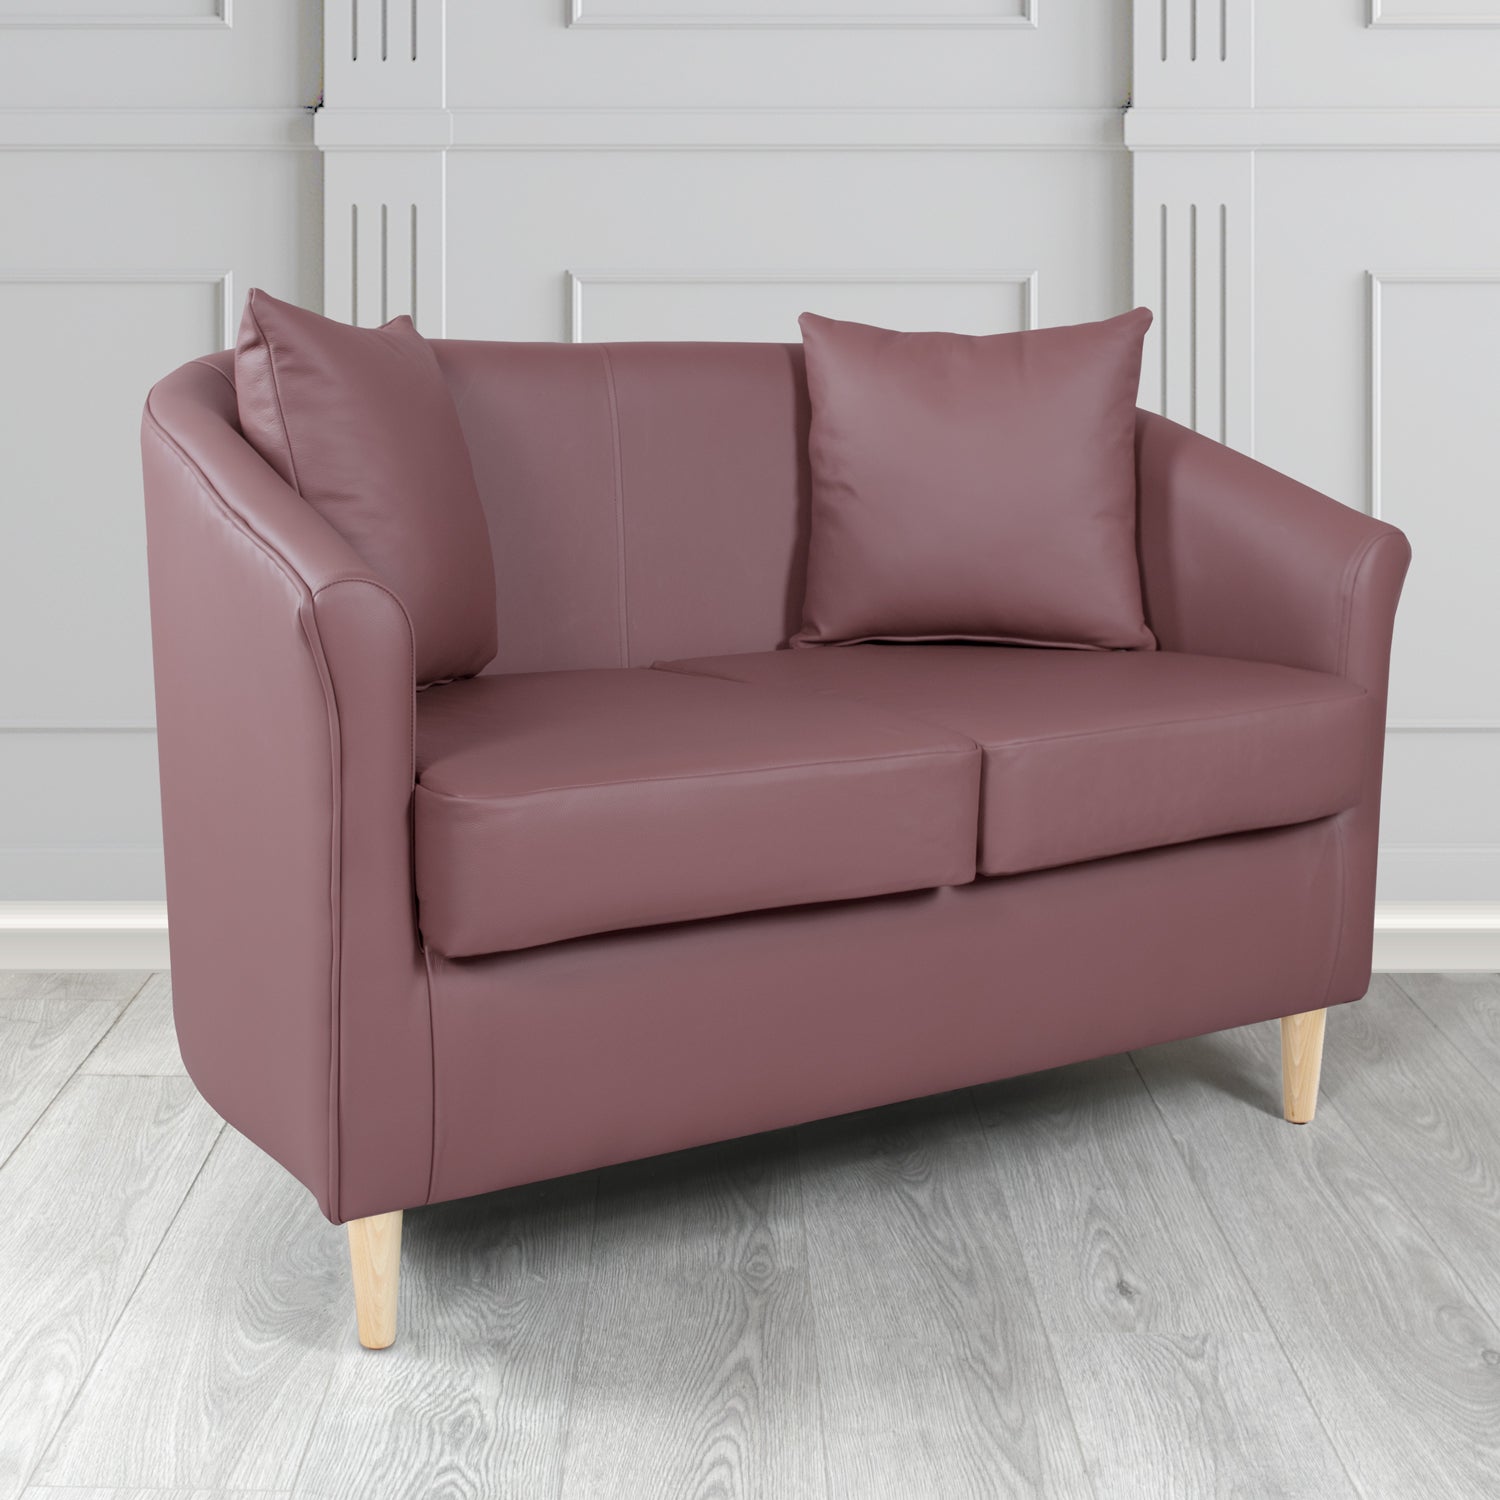 St Tropez Shelly Amethyst Crib 5 Genuine Leather 2 Seater Tub Sofa with Scatter Cushions - The Tub Chair Shop